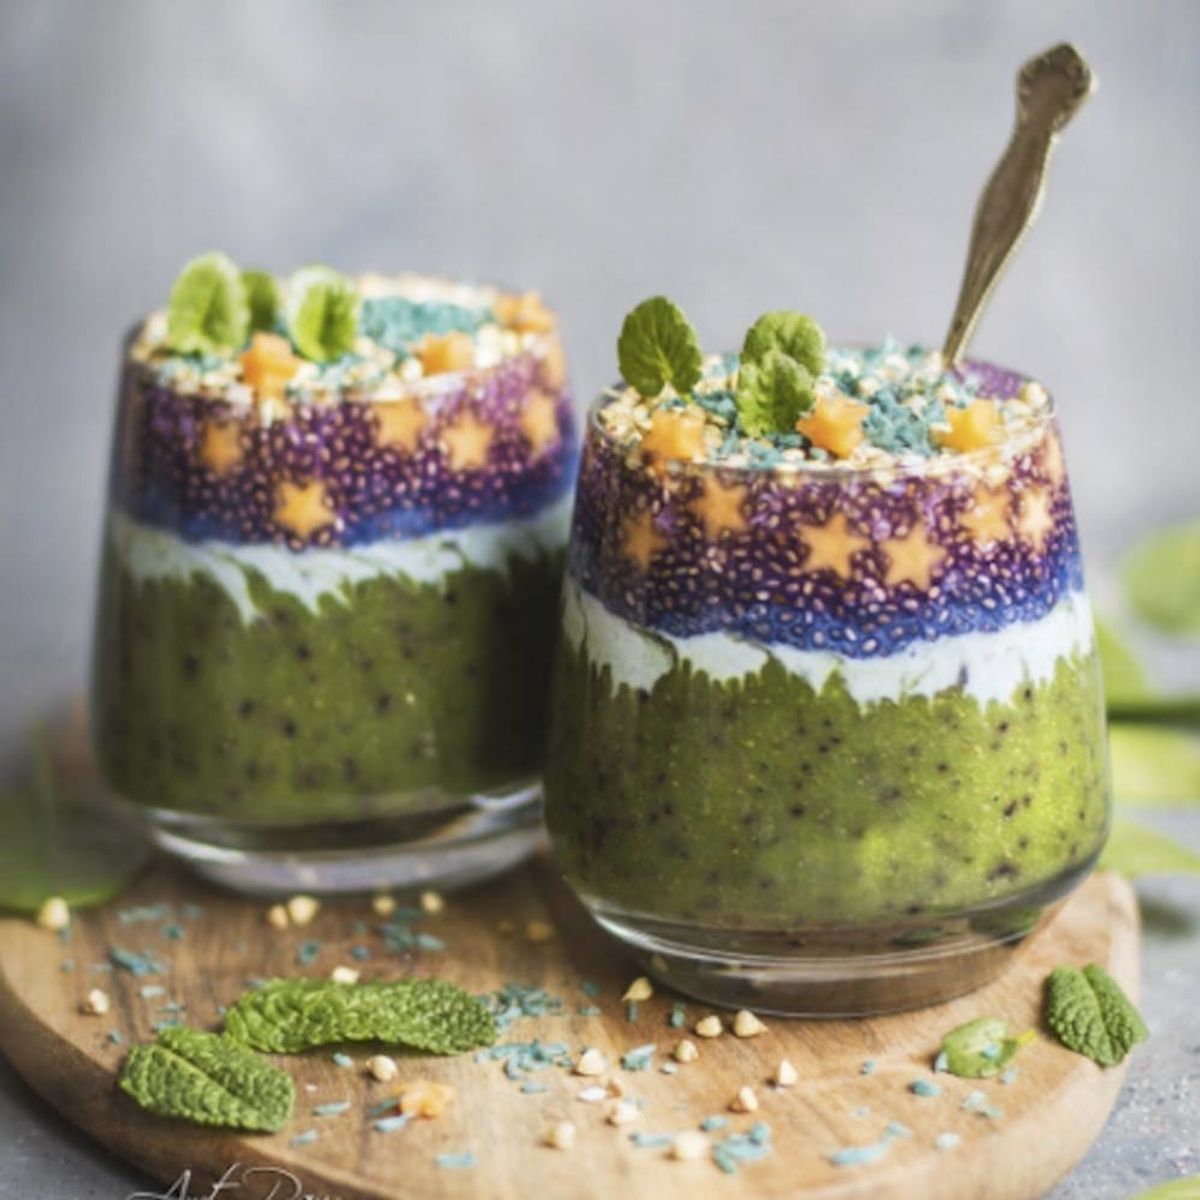 12 Pics of Chia Pudding That Will Make You *Want* to Eat Fresh